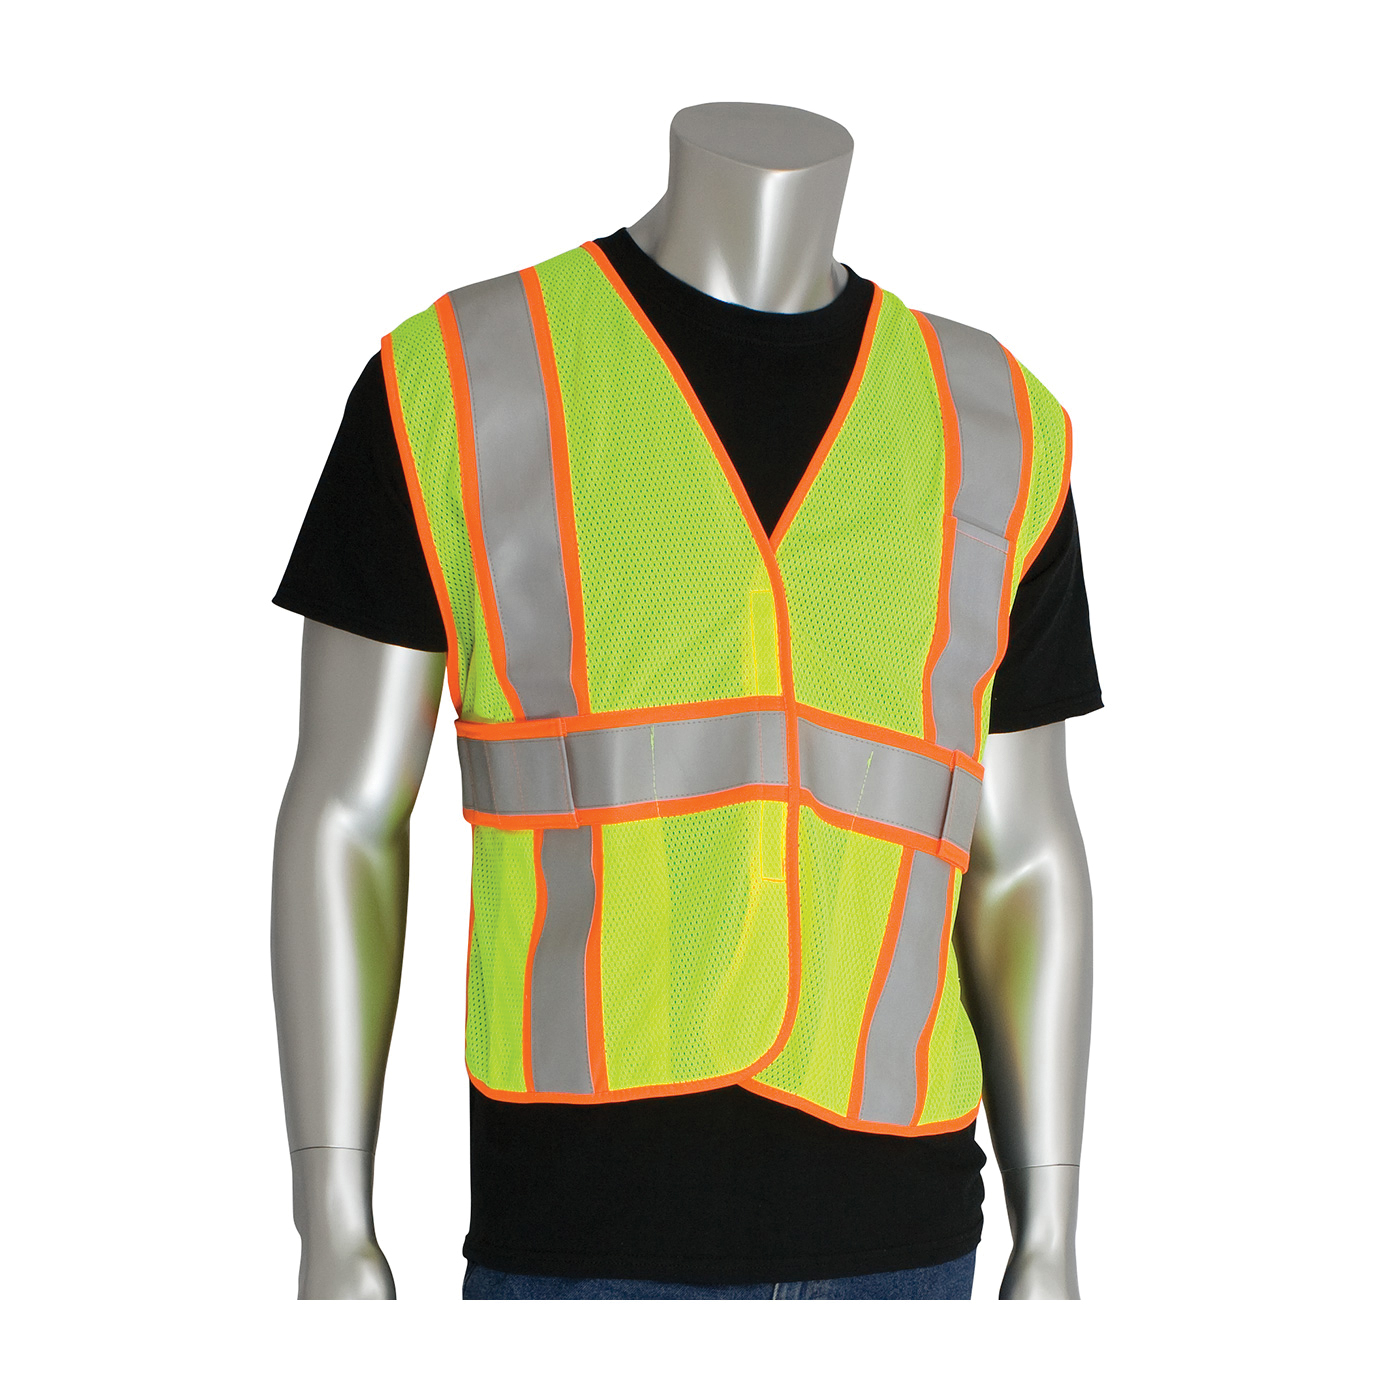 PIP® SafetyGear 305-USV5FRLY FR Treated Expandable Safety Vest, Universal, Hi-Viz Yellow, Polyester, Hook and Loop Closure, 2 Pockets, ANSI Class: Class 2, Specifications Met: ANSI/ISEA 107